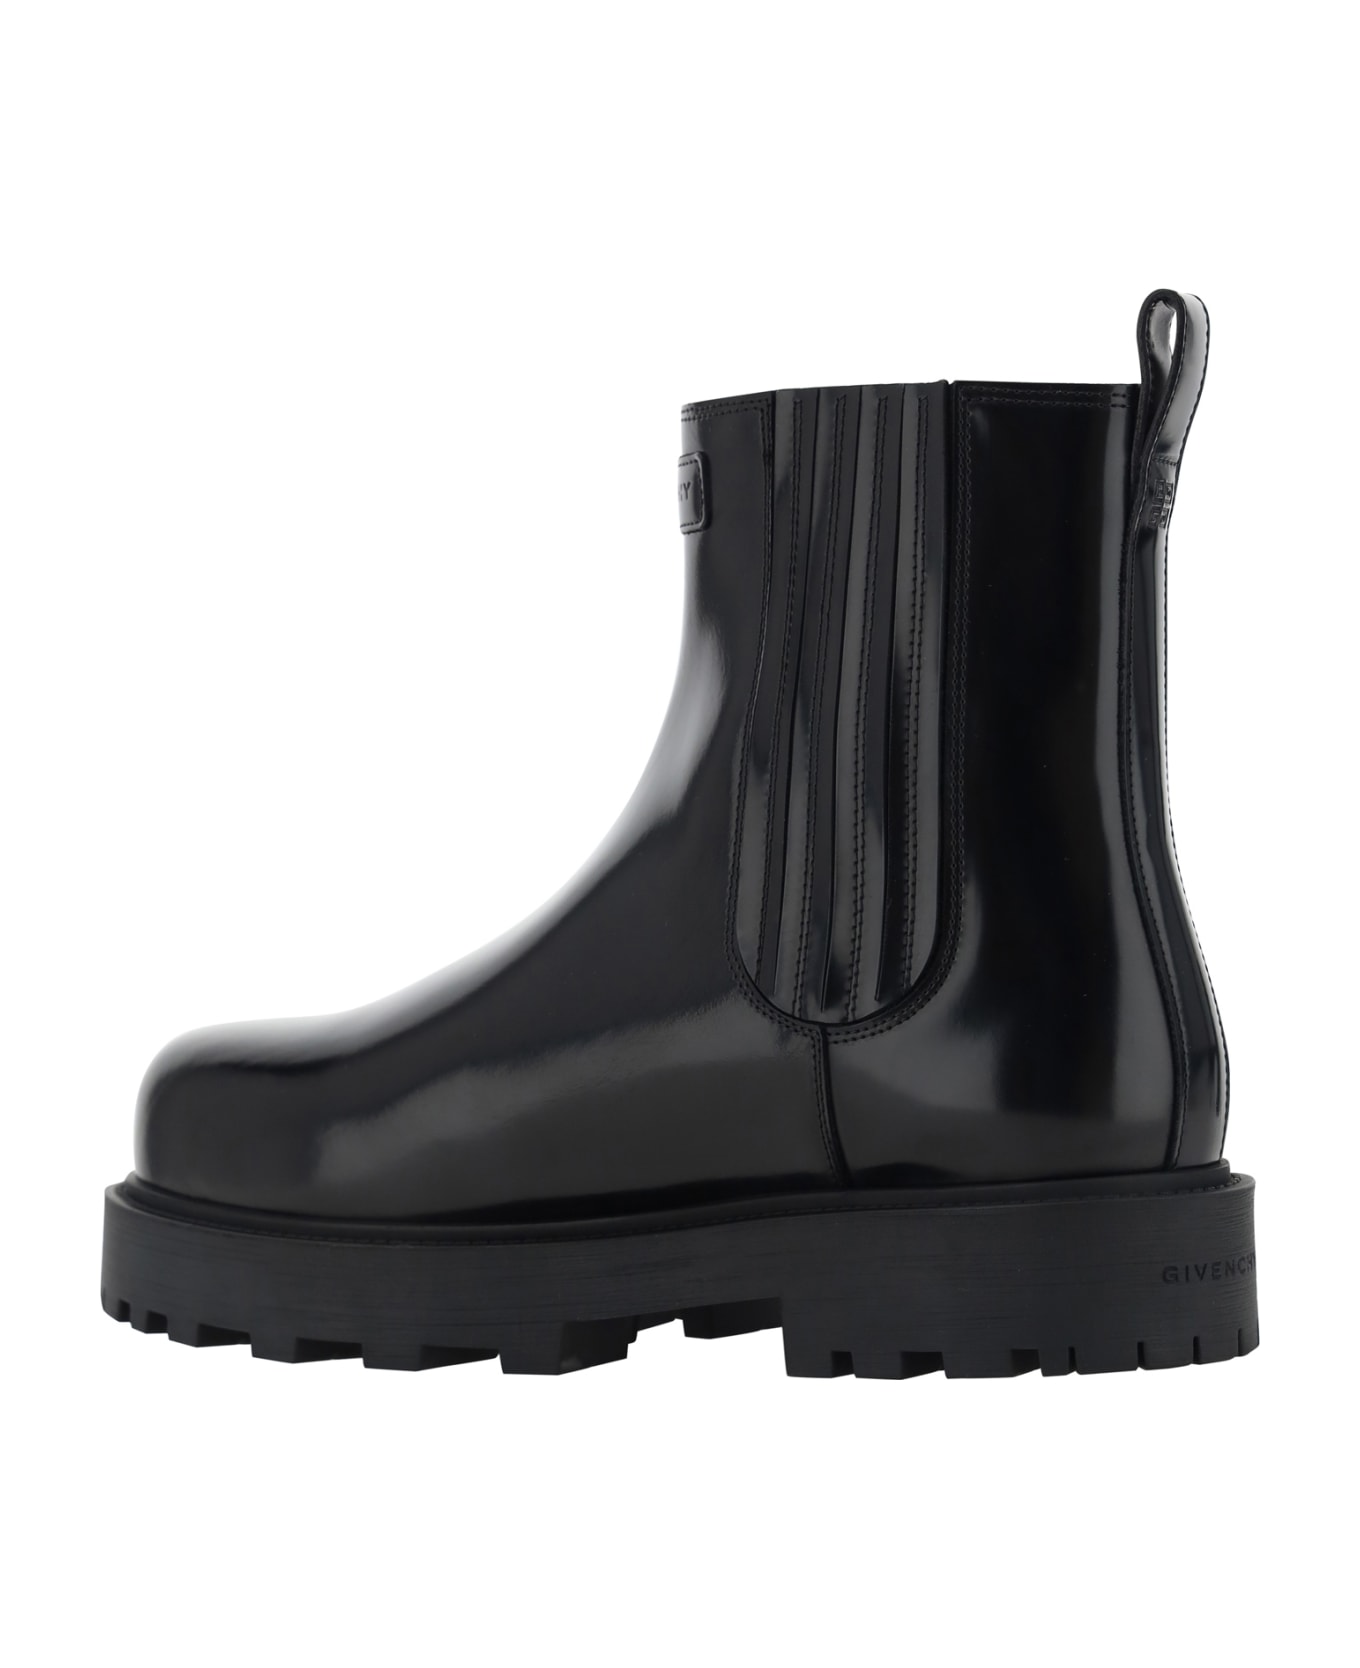 Givenchy Brushed Leather Chelsea Boots - Black ブーツ